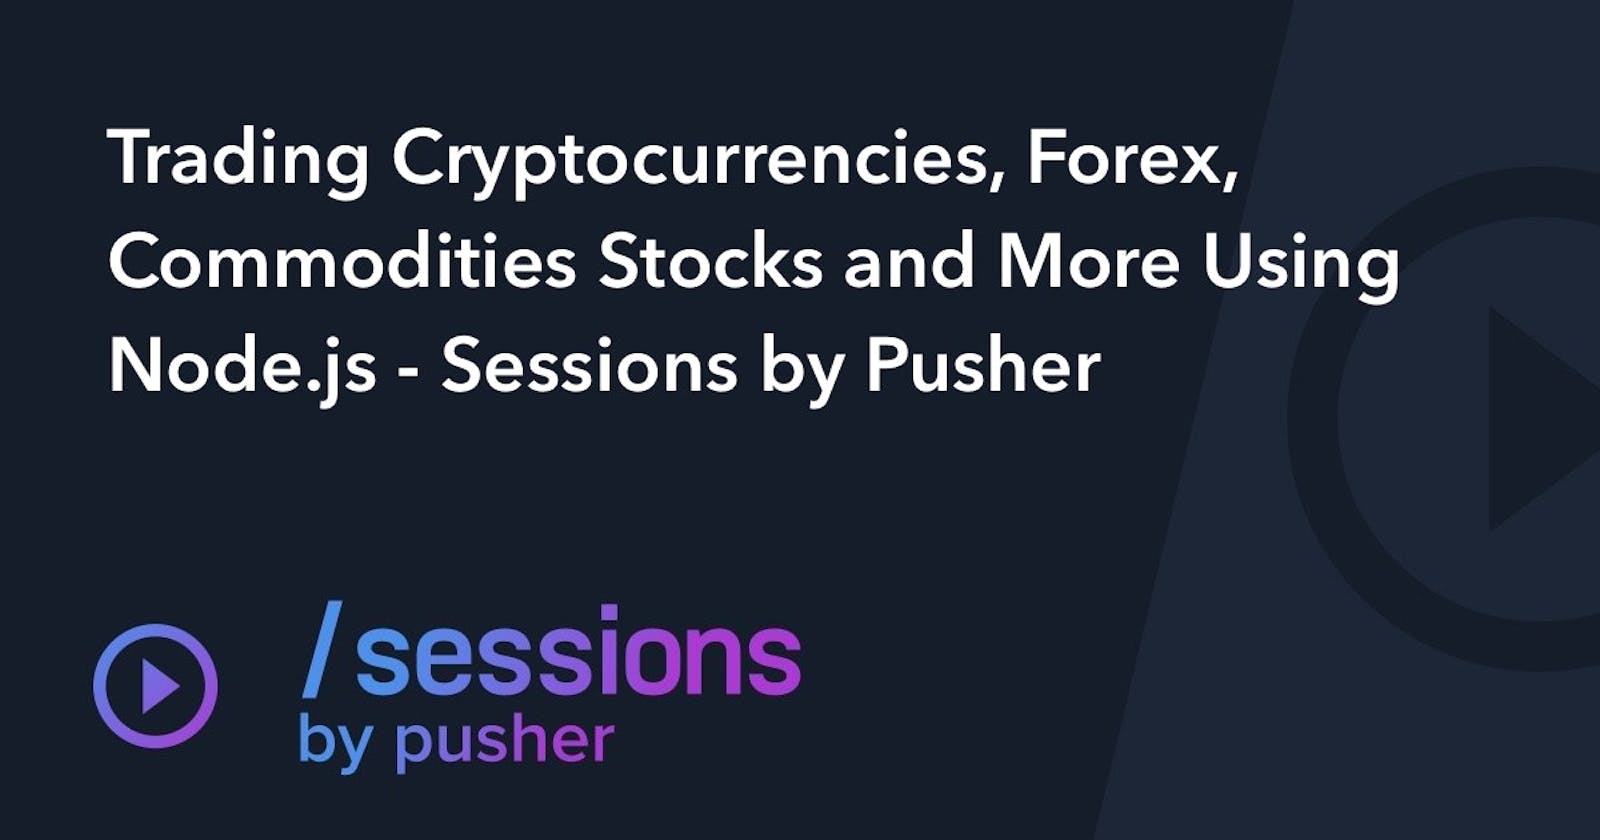 Trading Cryptocurrencies, Forex, Commodities Stocks and More Using Node.js - Sessions by Pusher